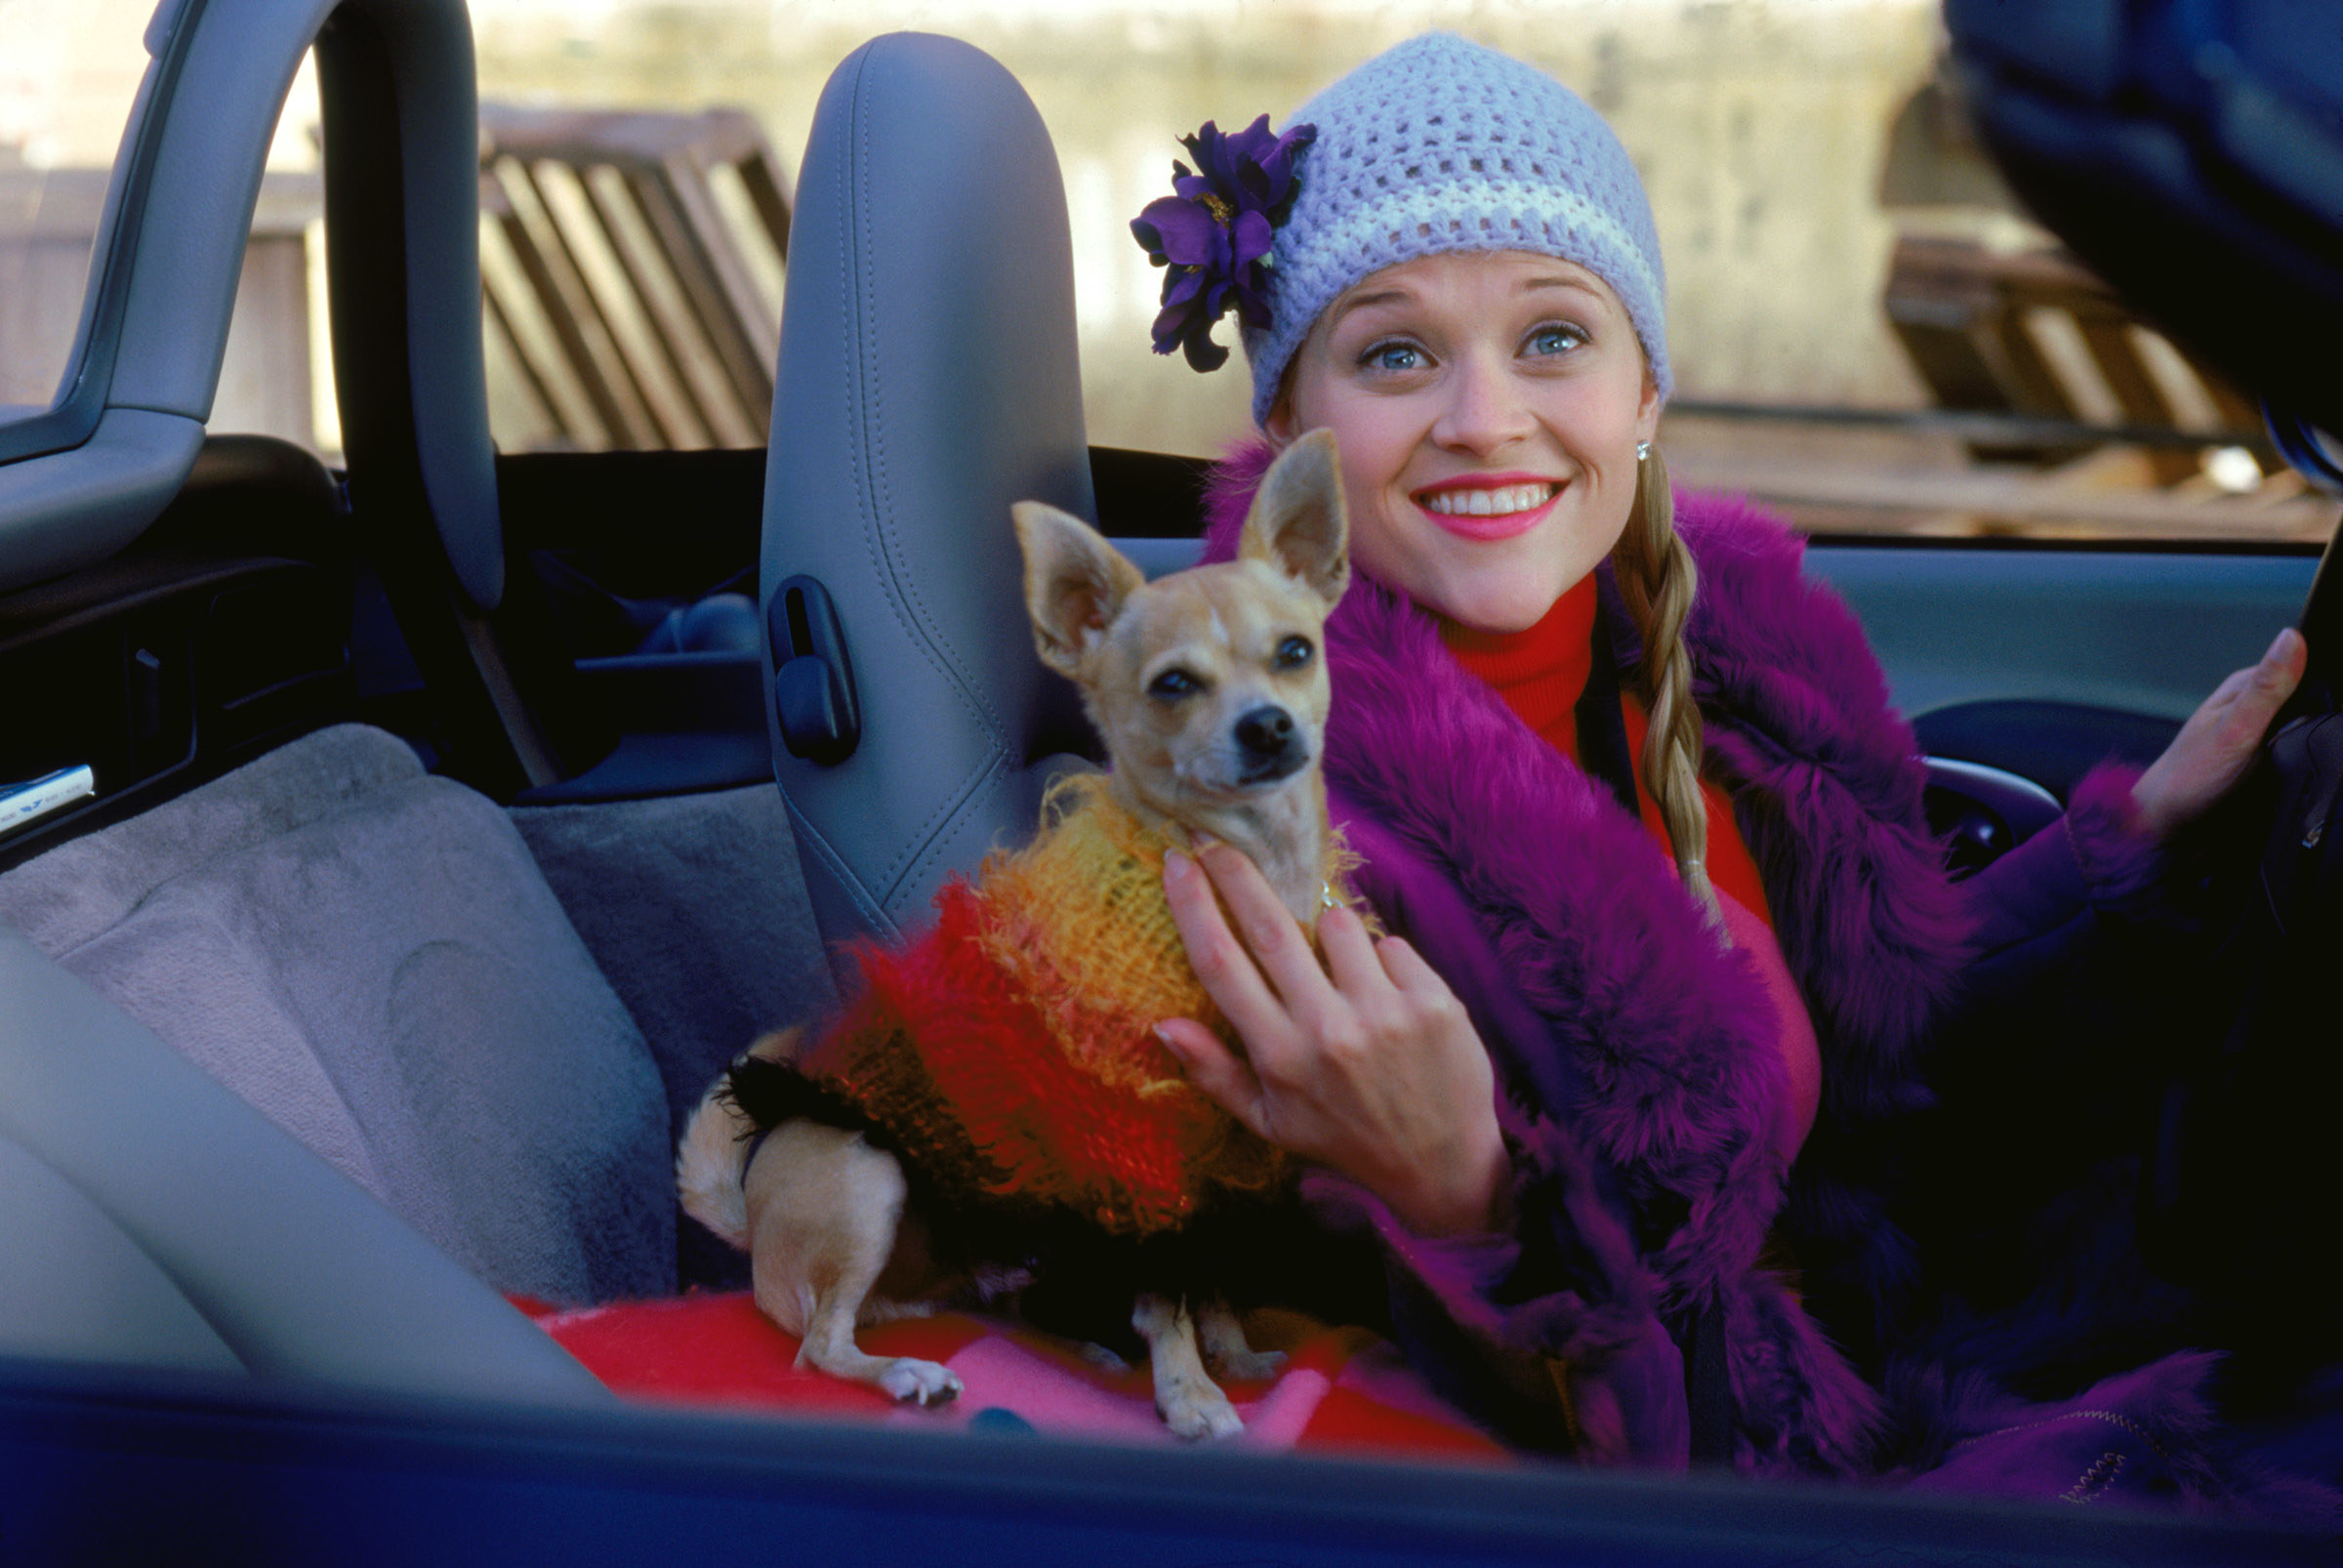 Elle in a knit hat and fur driving a car with her Chihuahua next to her